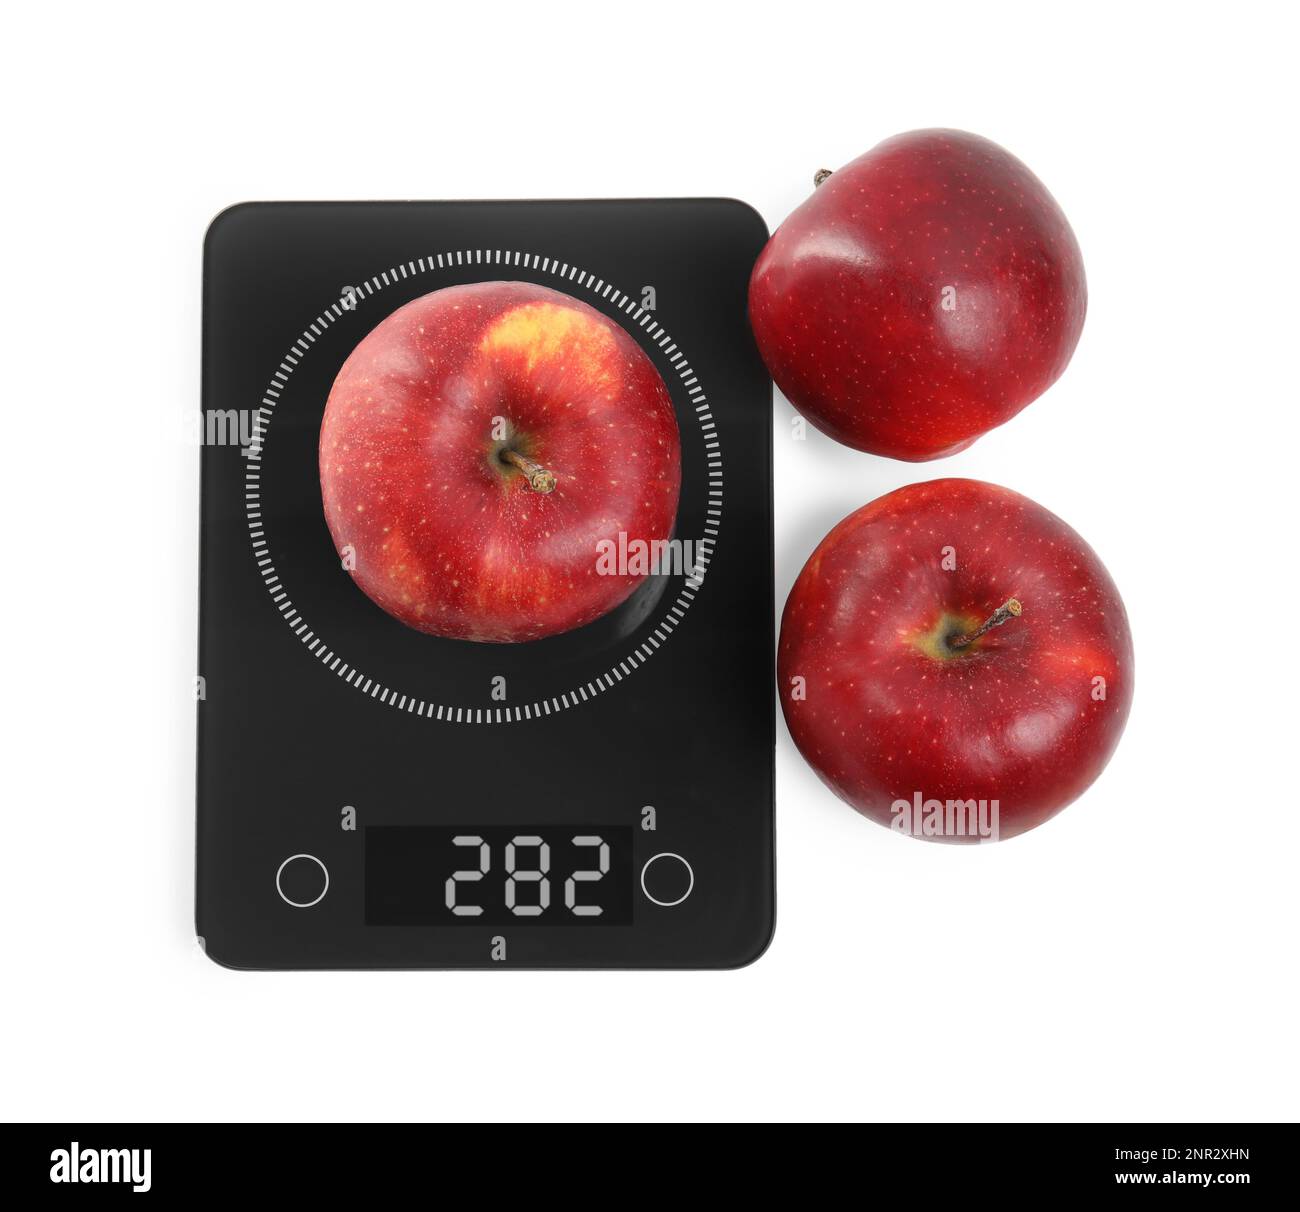 https://c8.alamy.com/comp/2NR2XHN/ripe-red-apples-and-electronic-scales-on-white-background-top-view-2NR2XHN.jpg